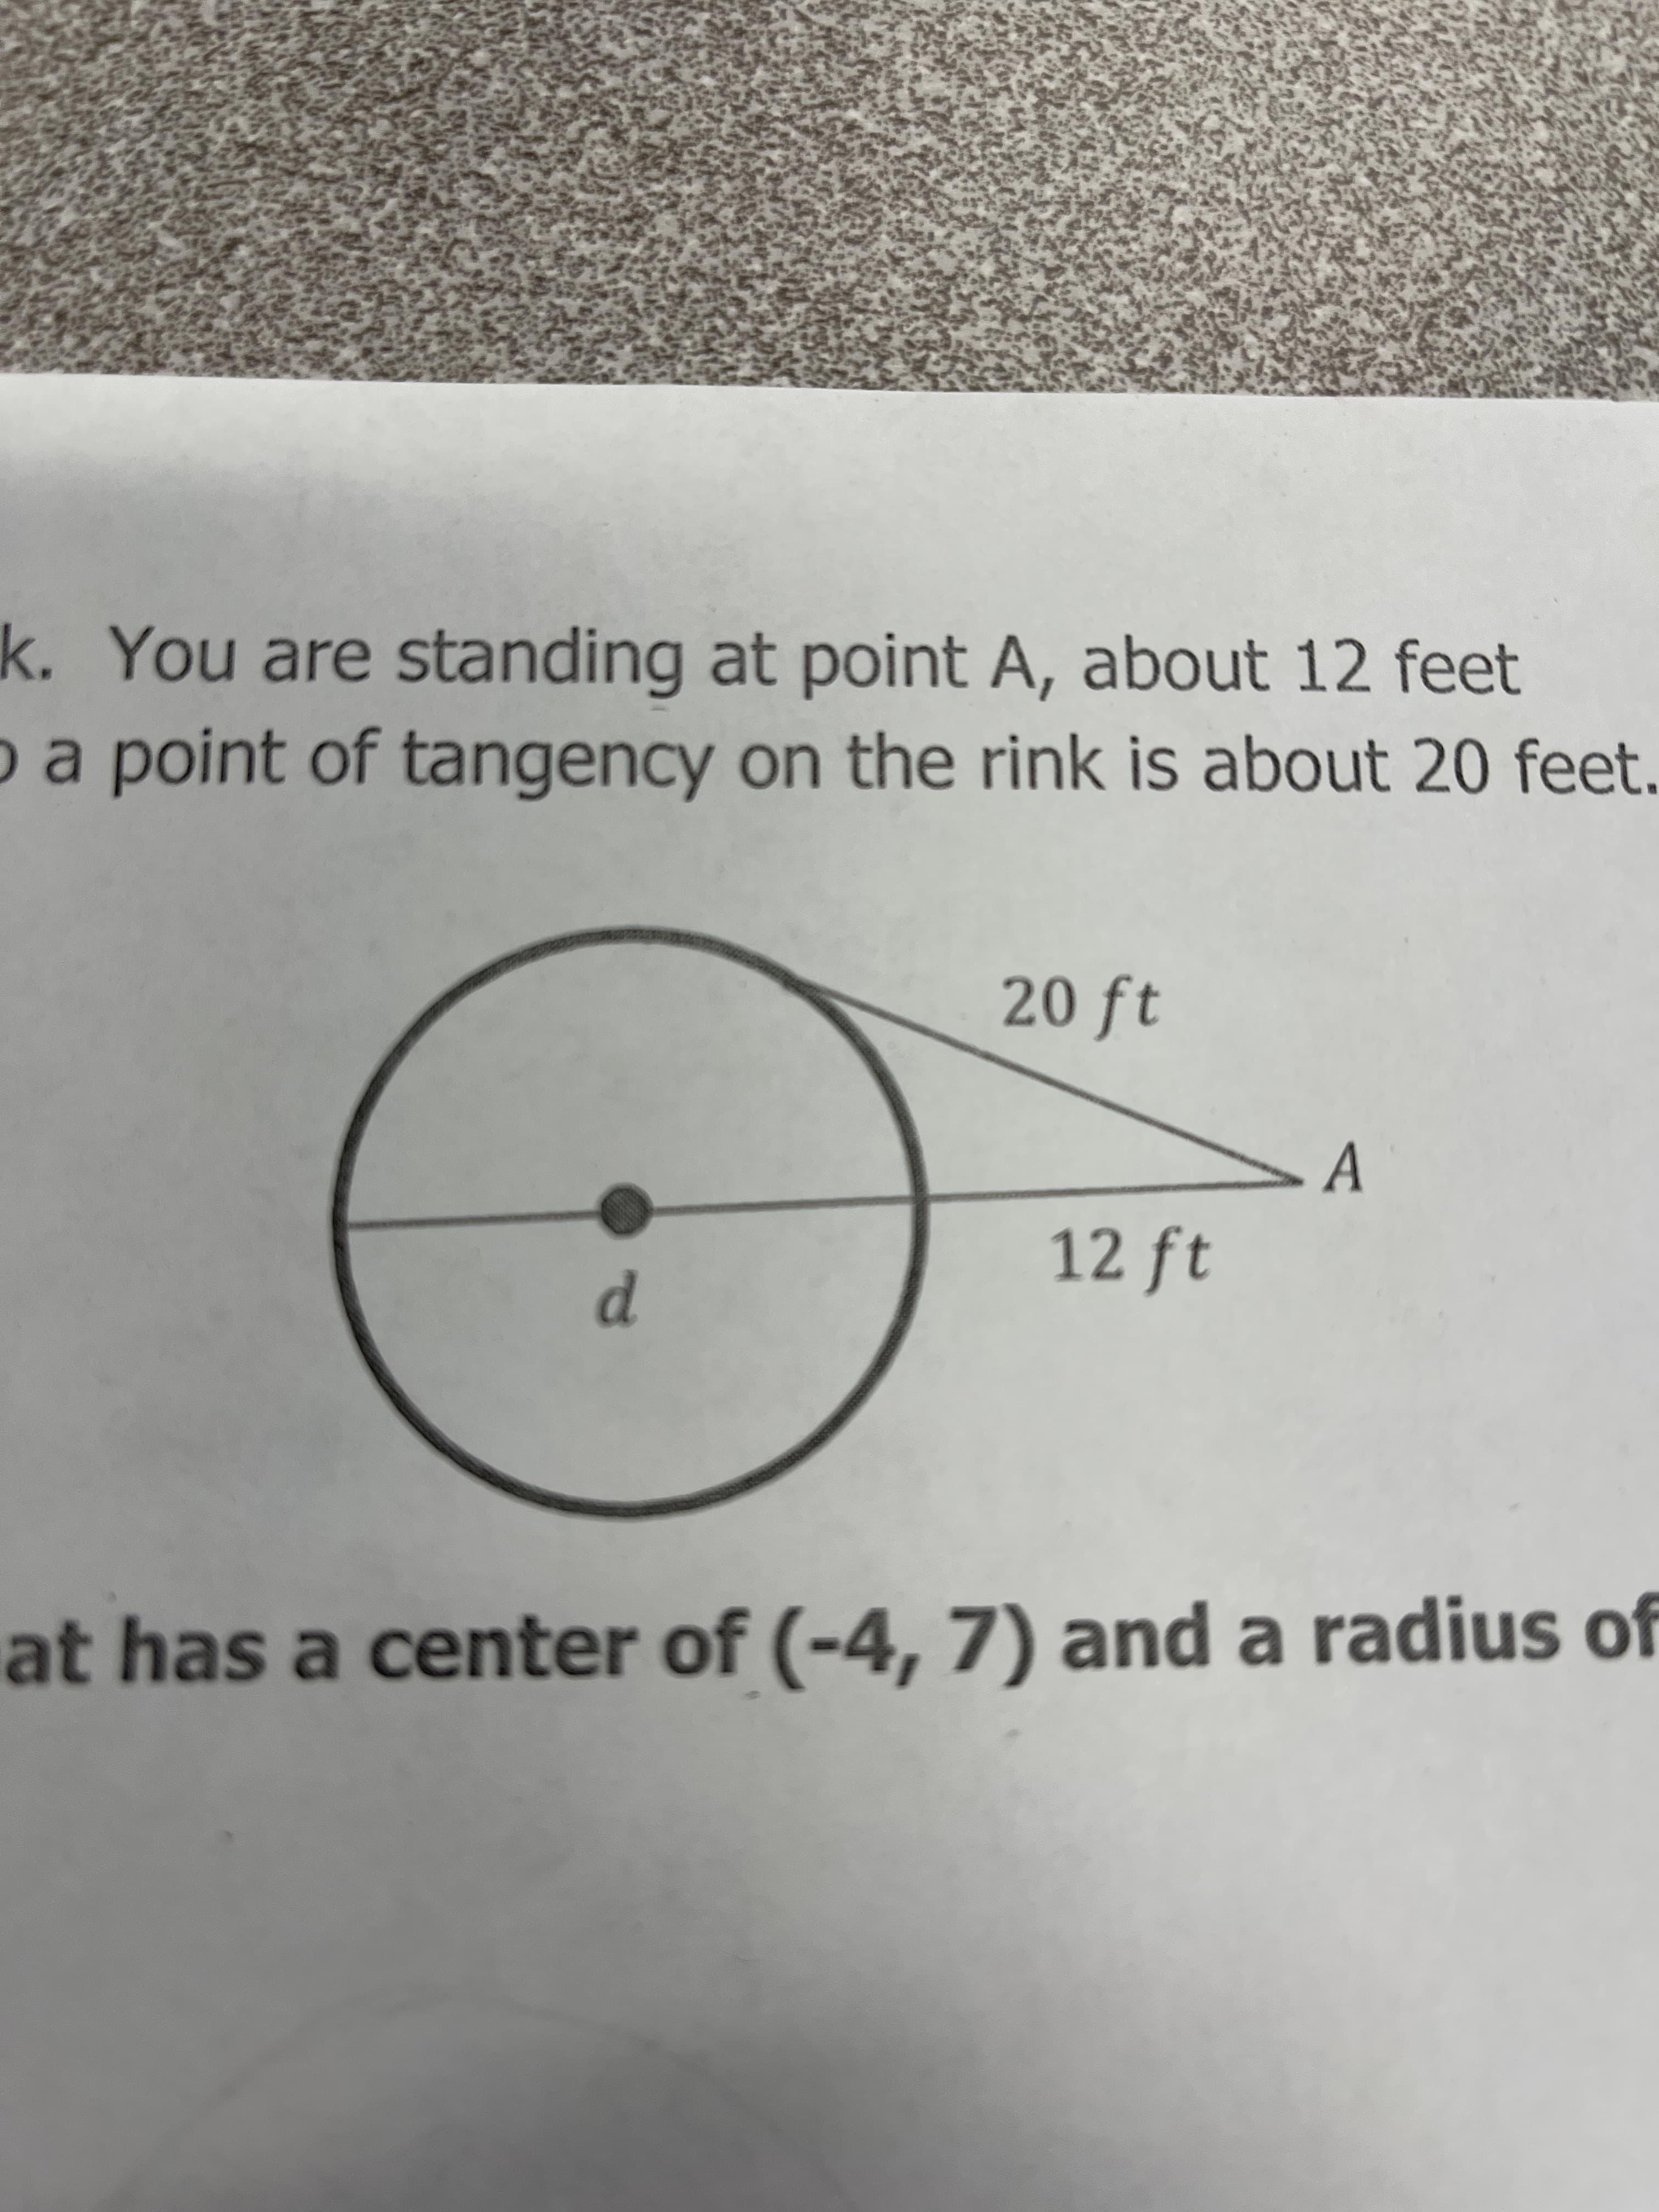 k. You are standing at point A, about 12 feet
oa point of tangency on the rink is about 20 feet.
20 ft
A
12 ft
p.
at has a center of (-4, 7) and a radiu of
